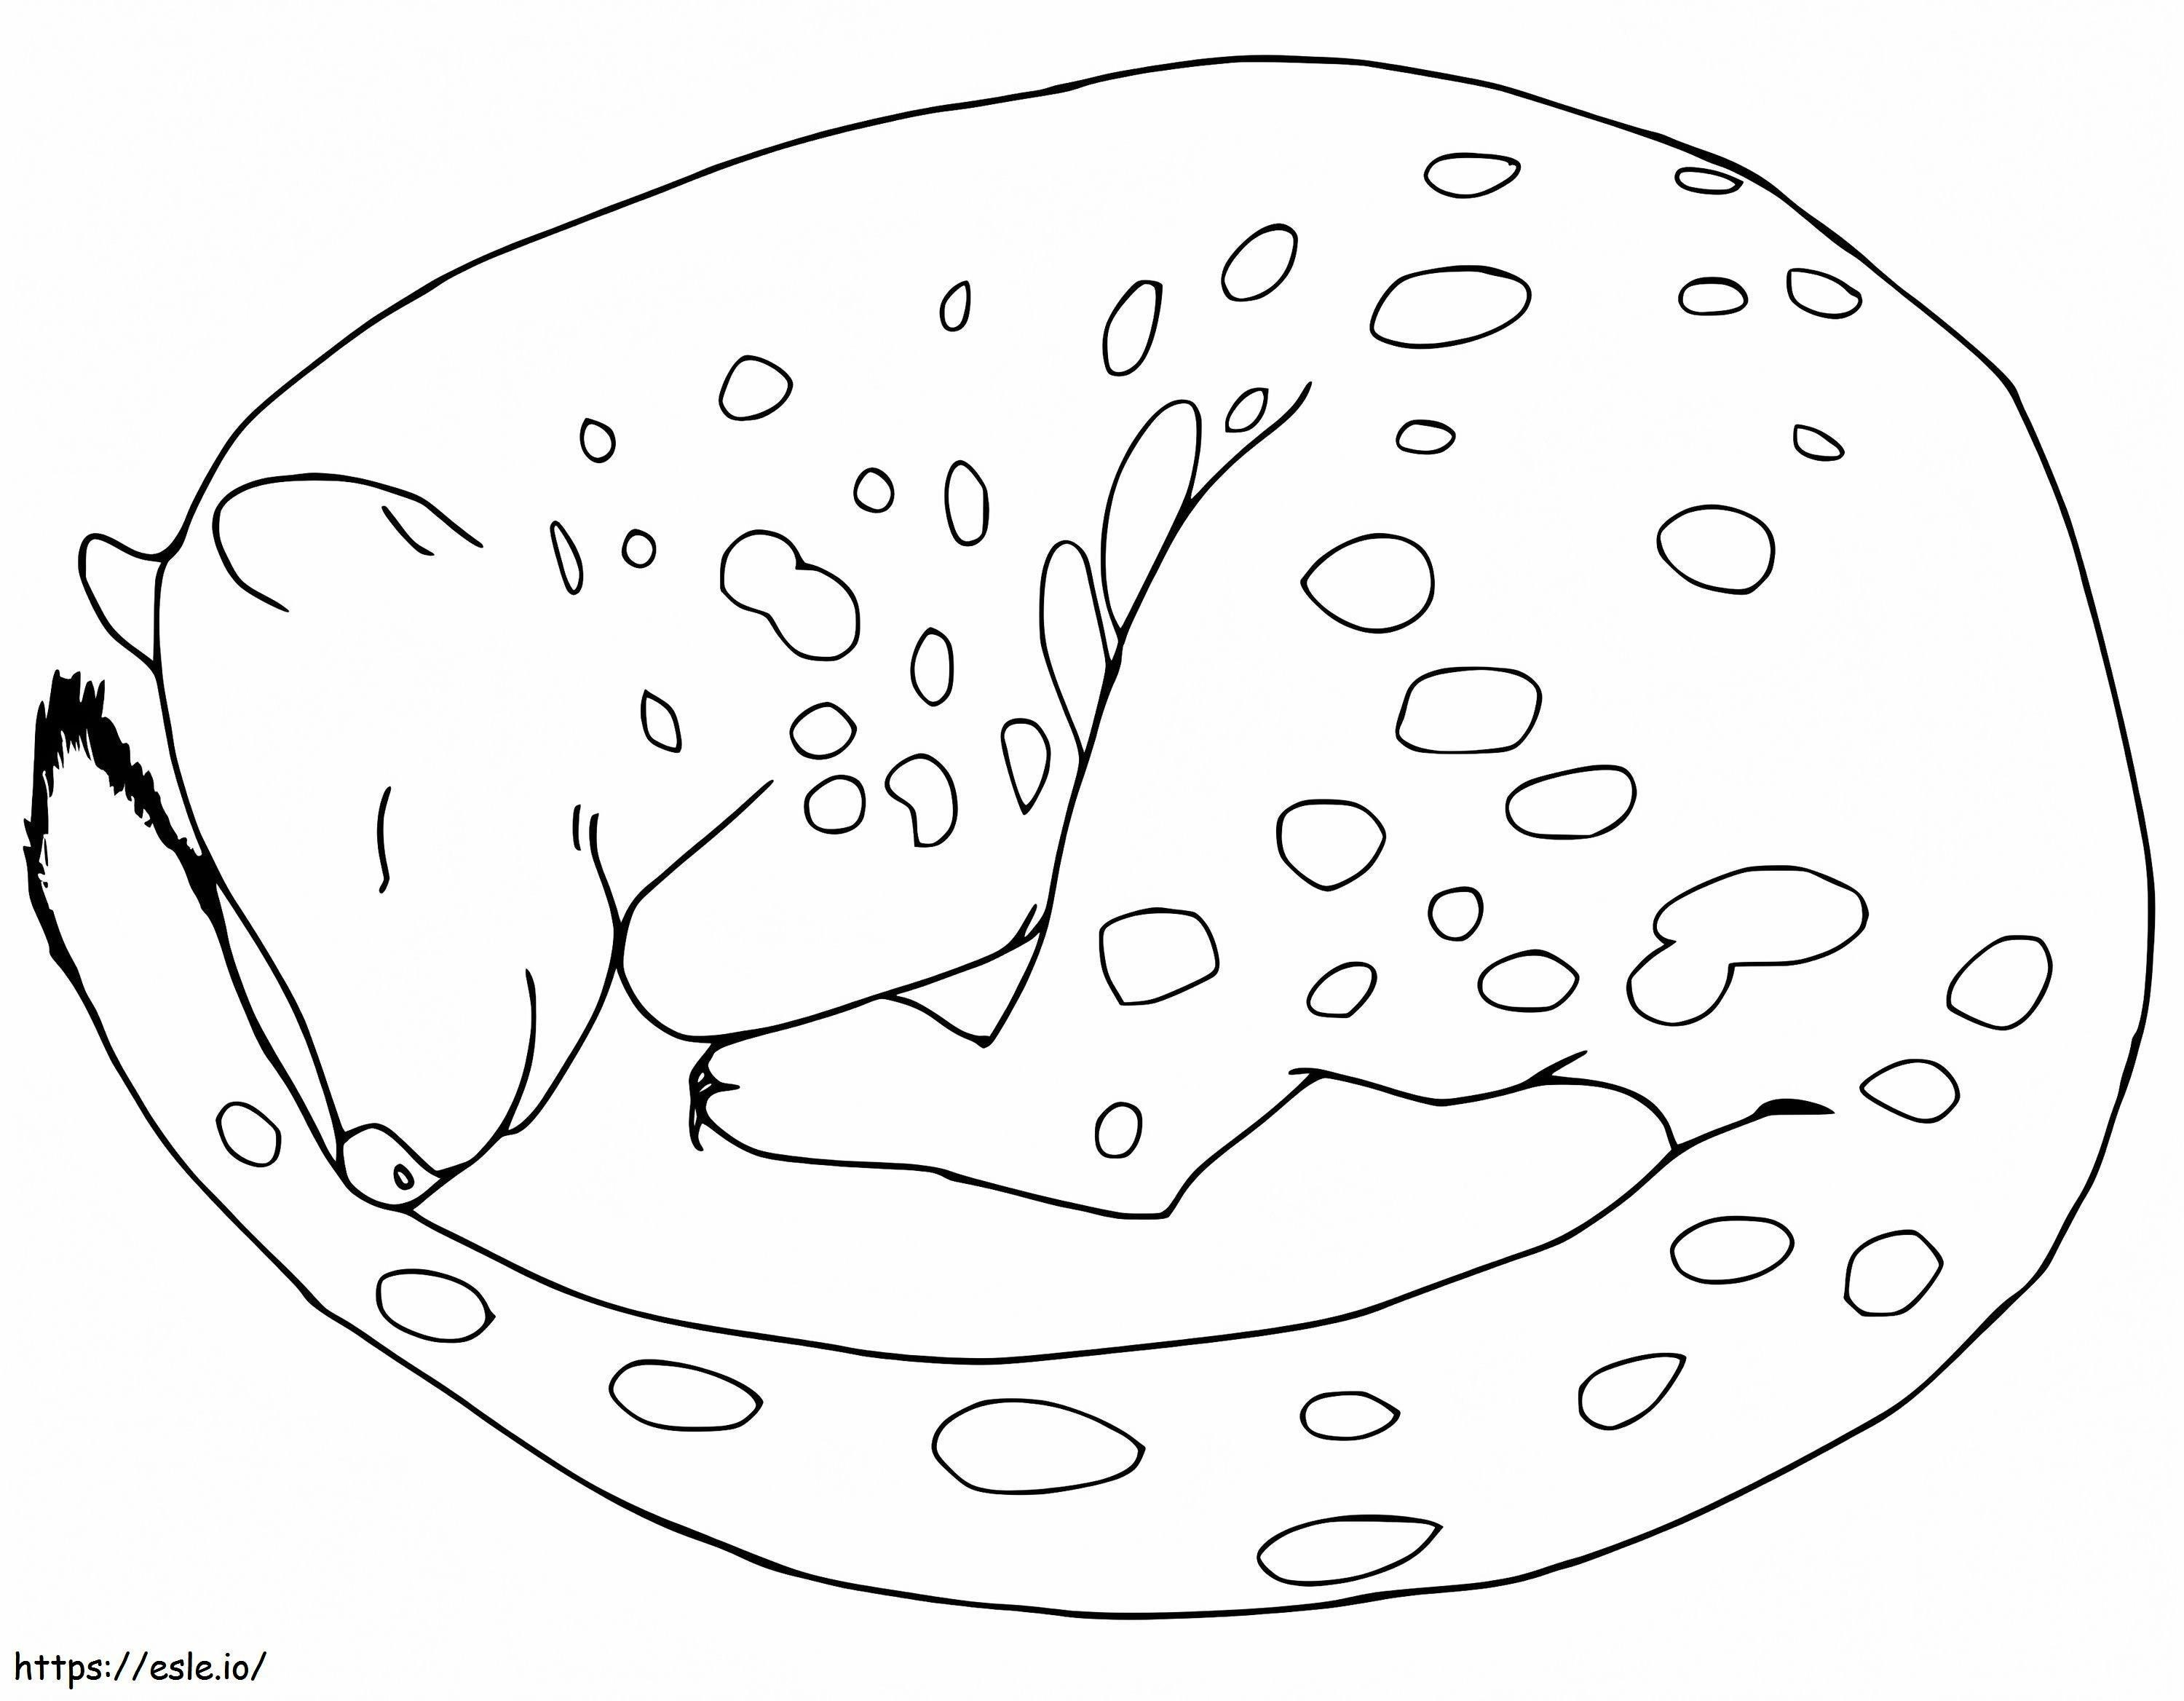 Quoll Sleeping coloring page